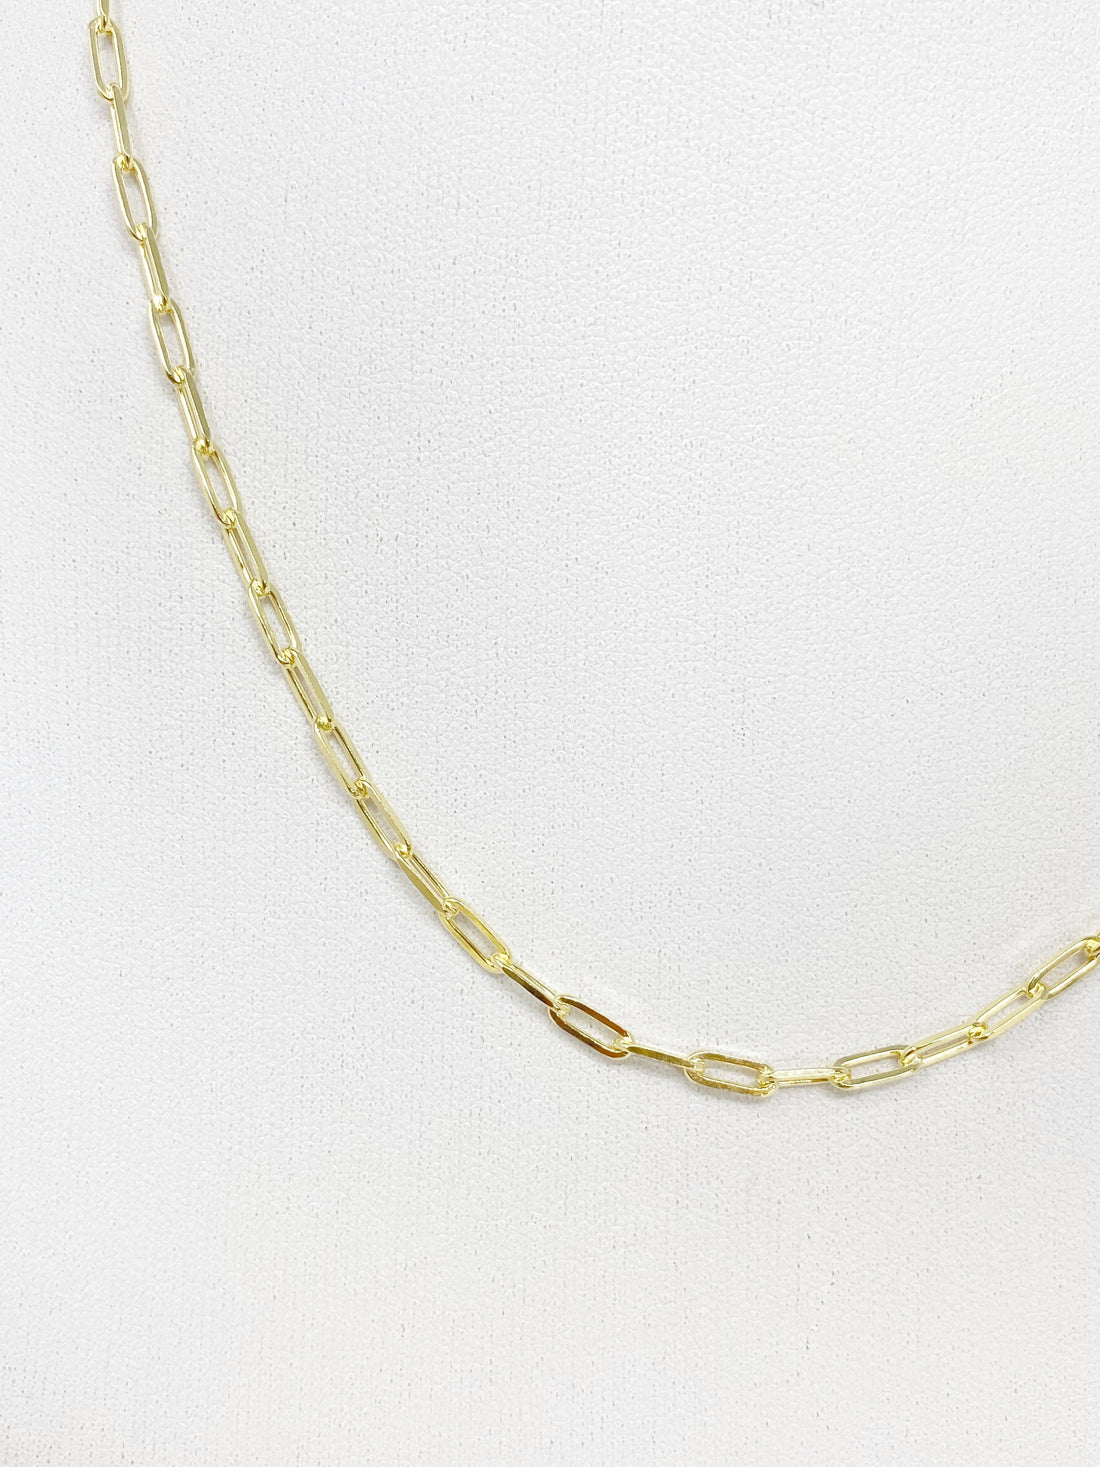 Charming Chainlink Necklace in Gold 16"